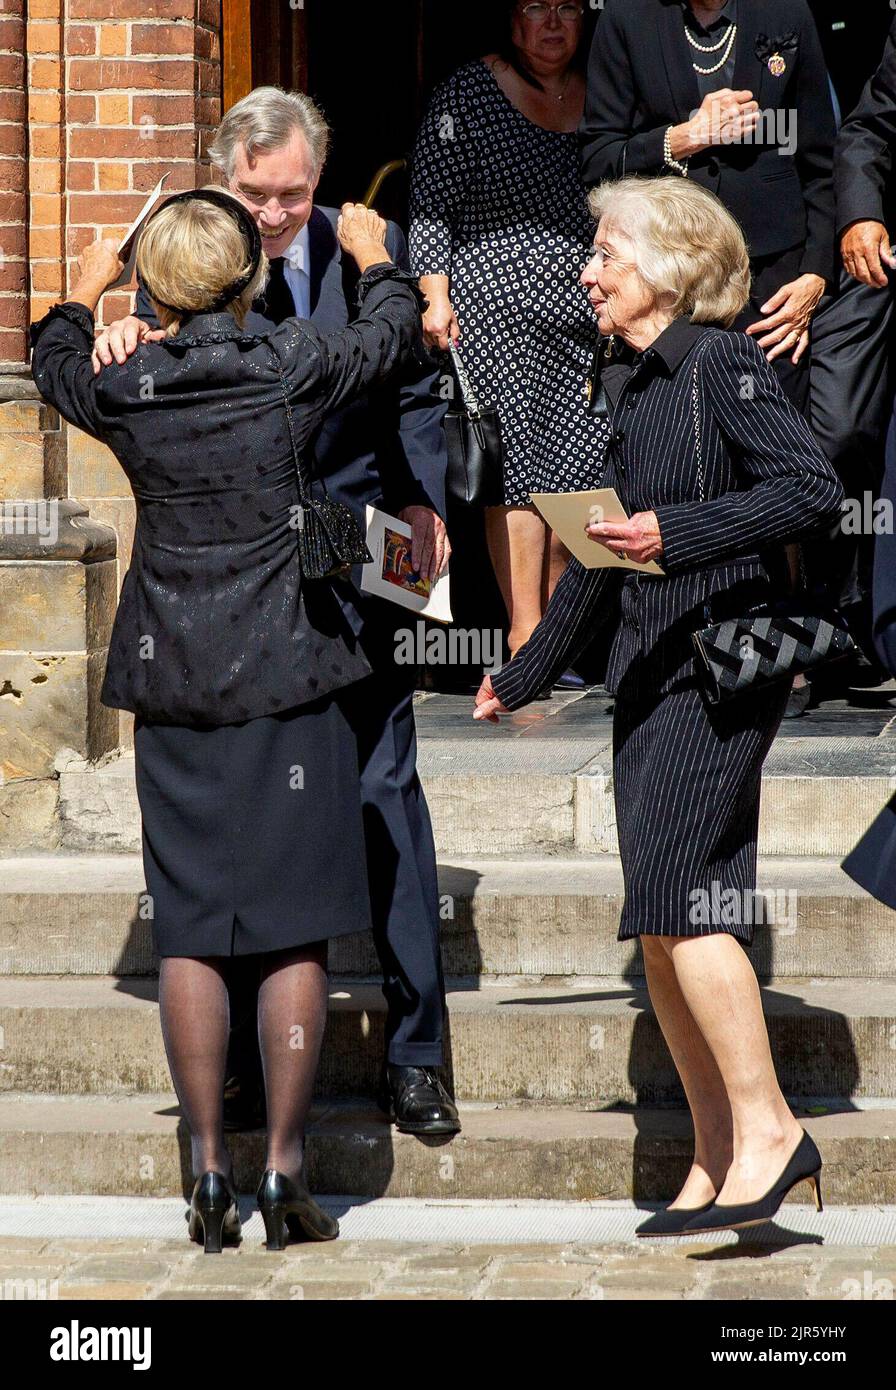 Archduchess Marie Astrid of Austria and Prince Guillaume of Luxembourg and Archduchess Anna-Gabriele of Austria leave at the l eglise Saint-Pierre in Belil, on August 22, 2022, after attended the funeral of Prince Wauthier de Ligne (10-07-1952/15-08-2022), he was the First Cousin of the Grand Duke of Luxembourg Photo: Albert Nieboer/Netherlands OUT/Point de Vue OUT Stock Photo